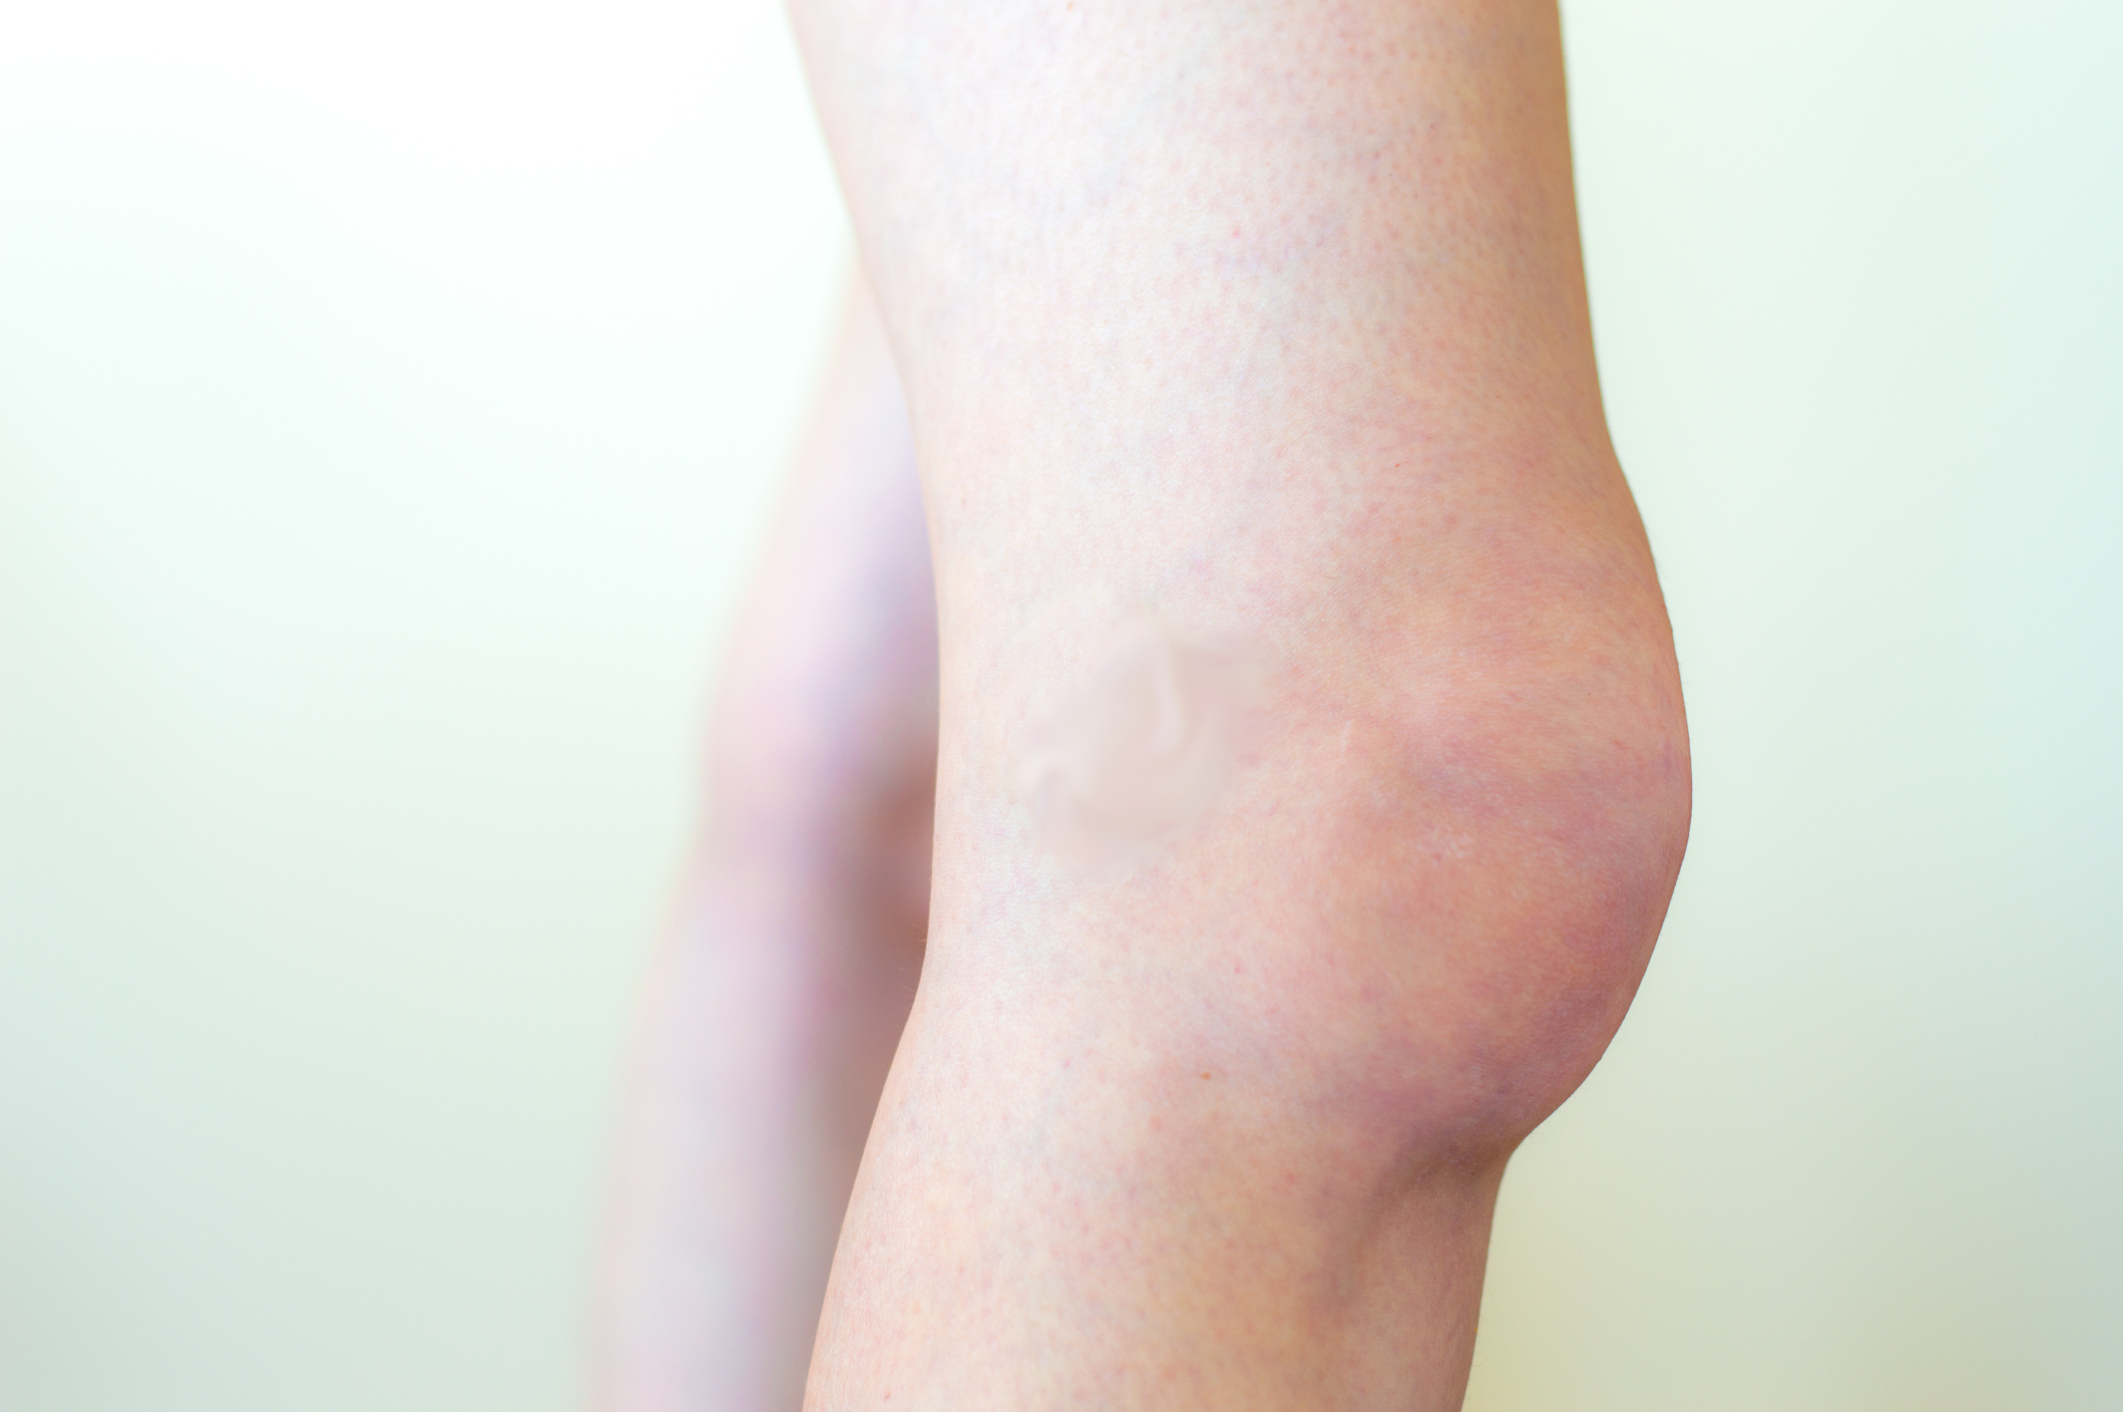 edema in knee joint